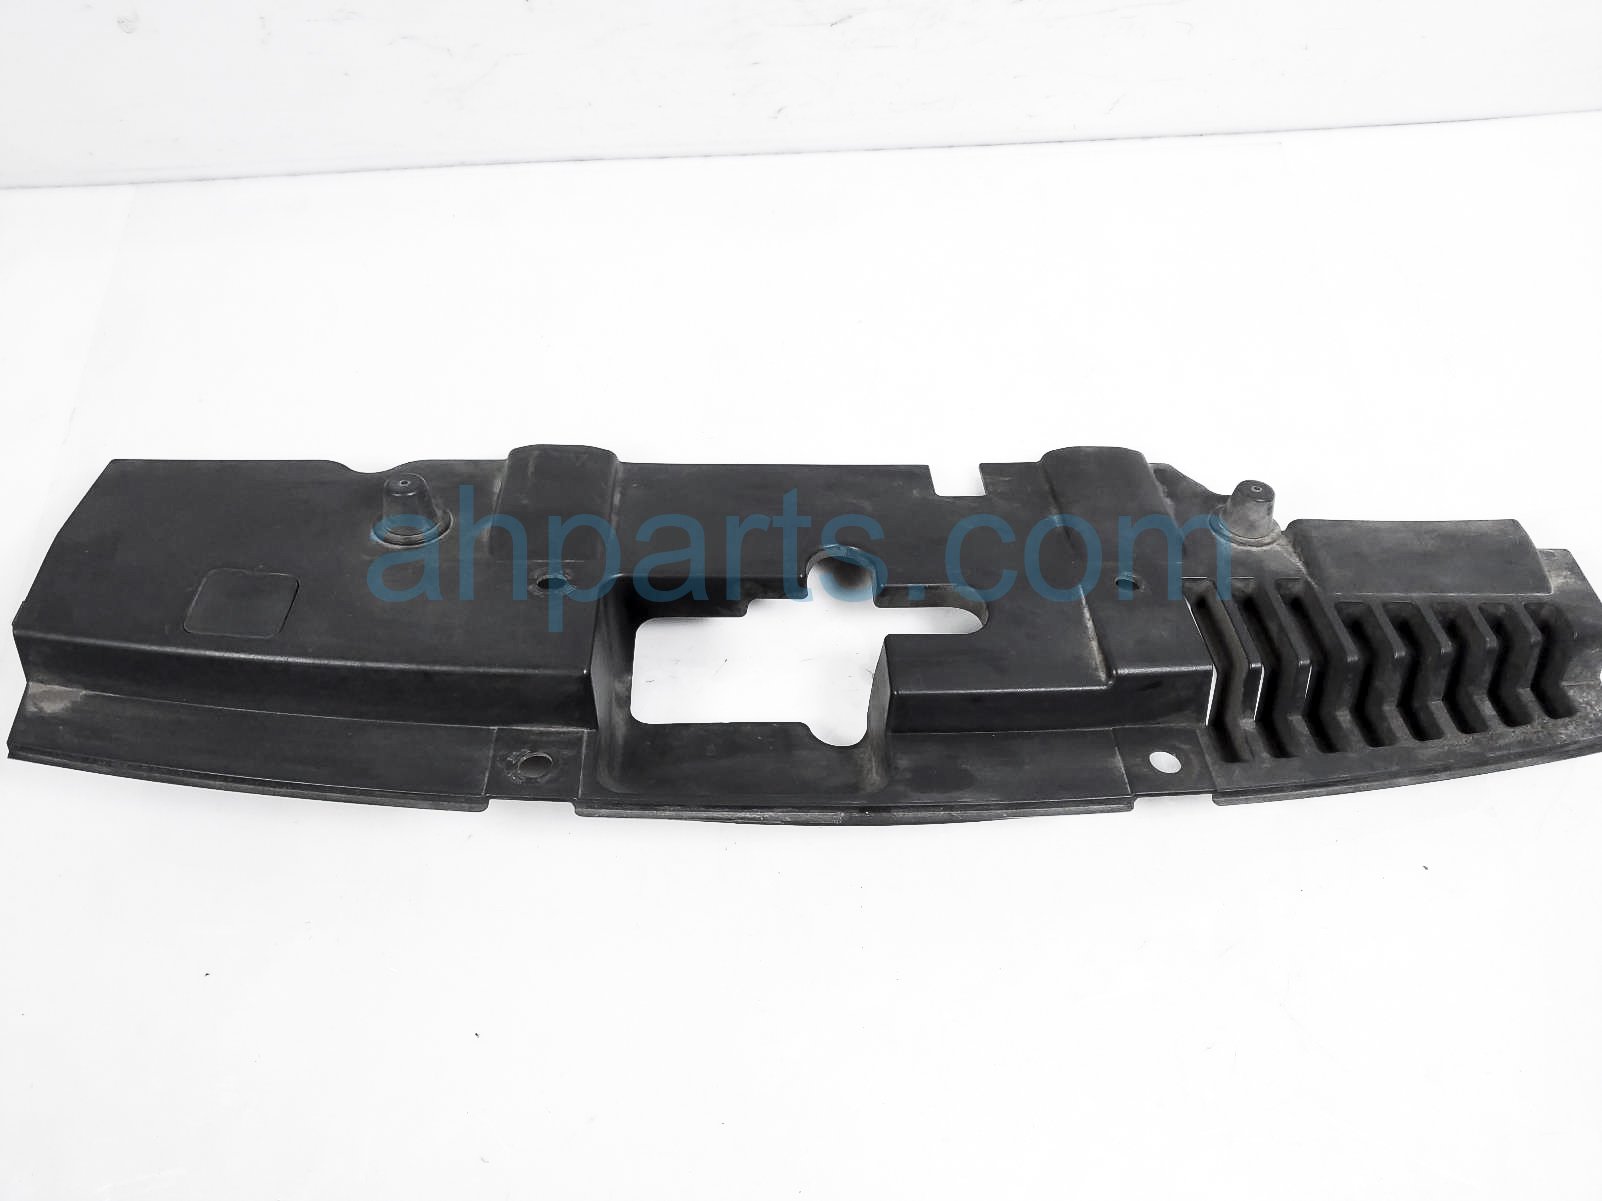 Sold 2017 Honda Accord Upper Grille Engine Sight Shield 71106-T2F-A50,